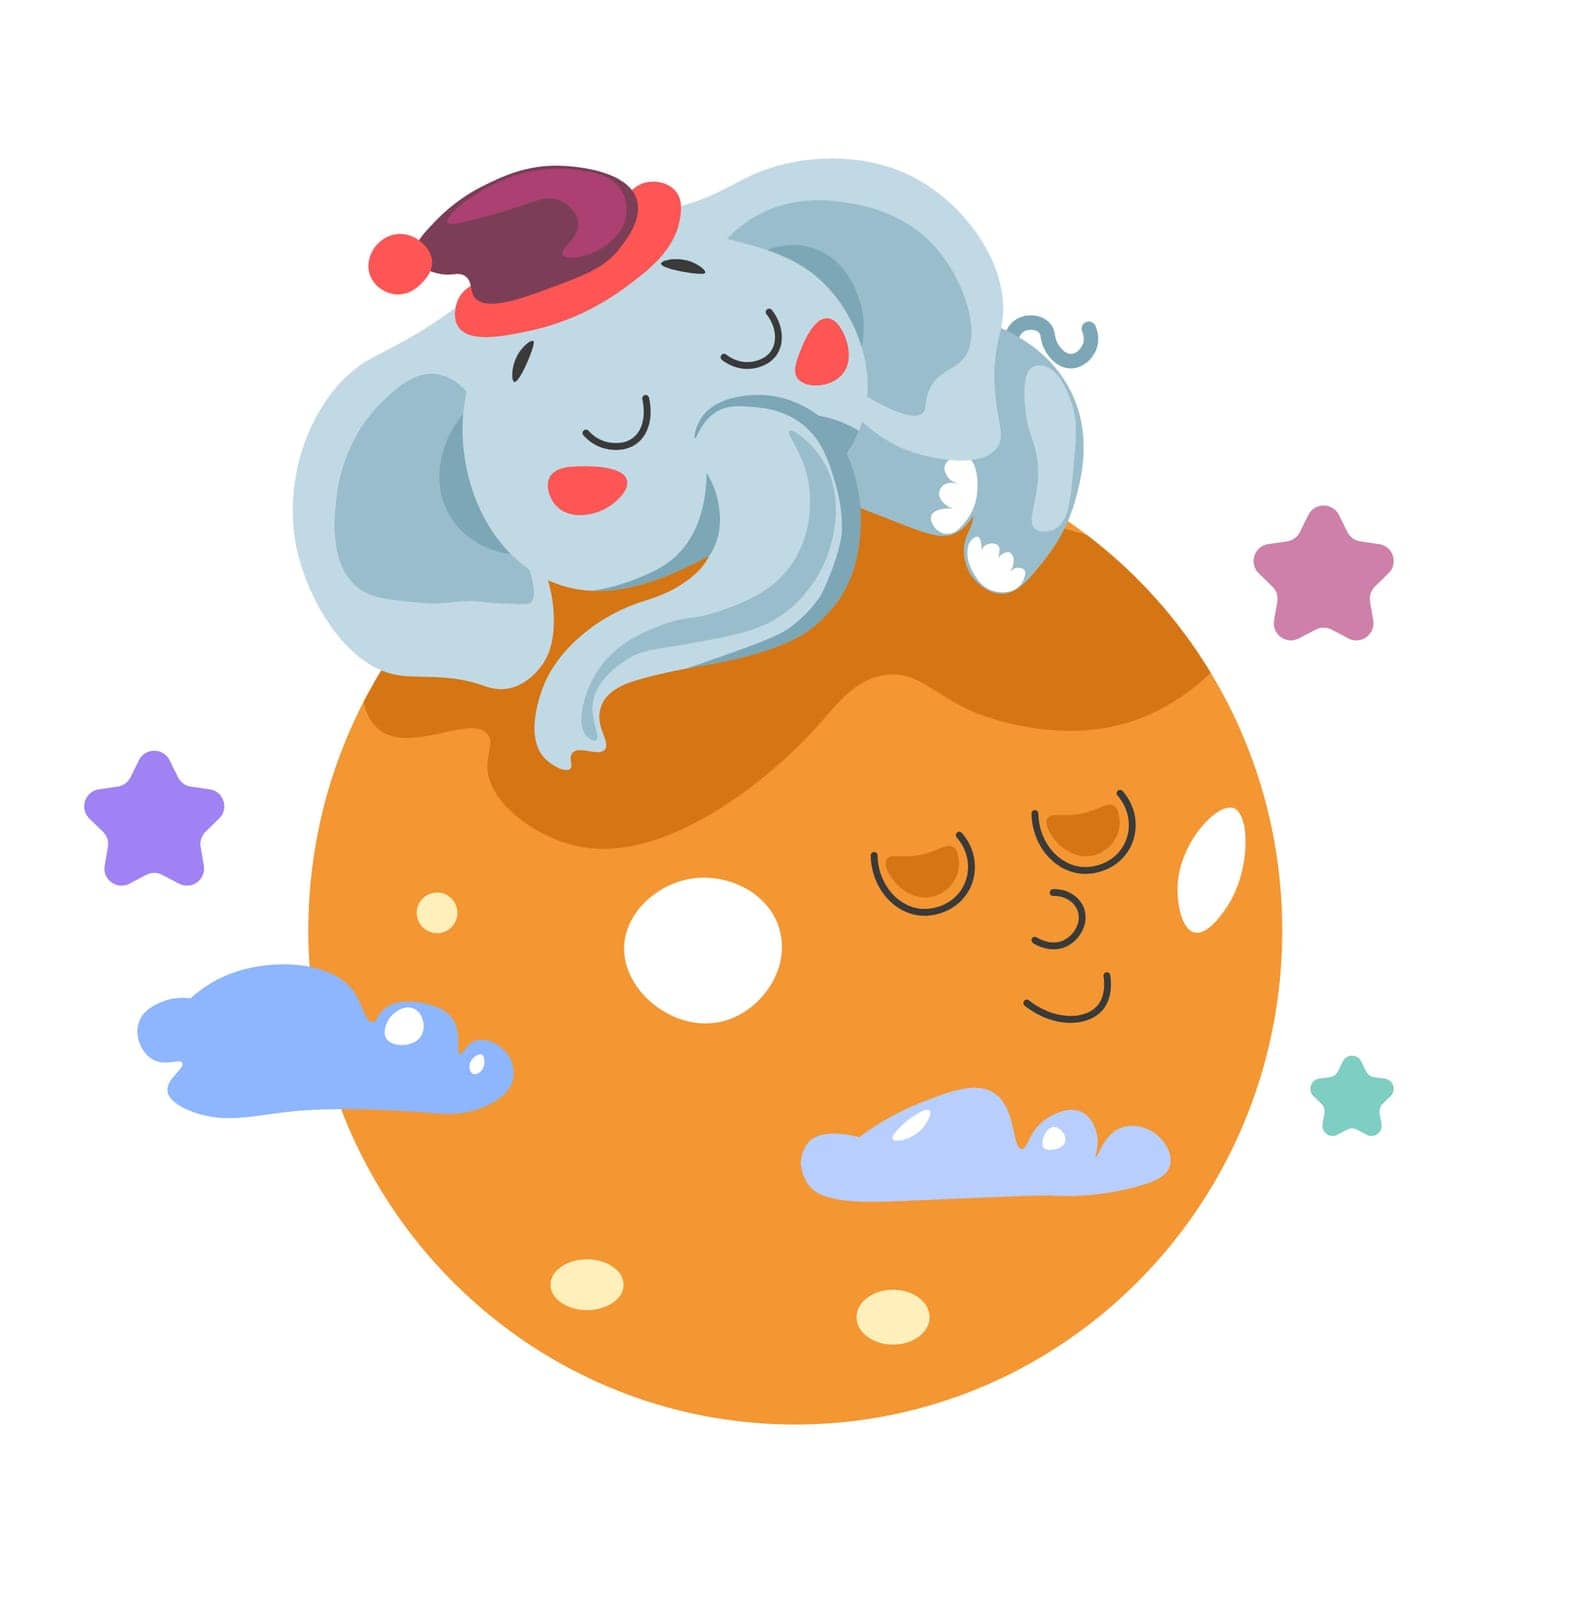 Sleeping elephant lying on the full moon surrounded with stars and clouds. Night and bedtime for children, sleepy personage wearing pajama hat, nursery theme decoration. Vector in flat style